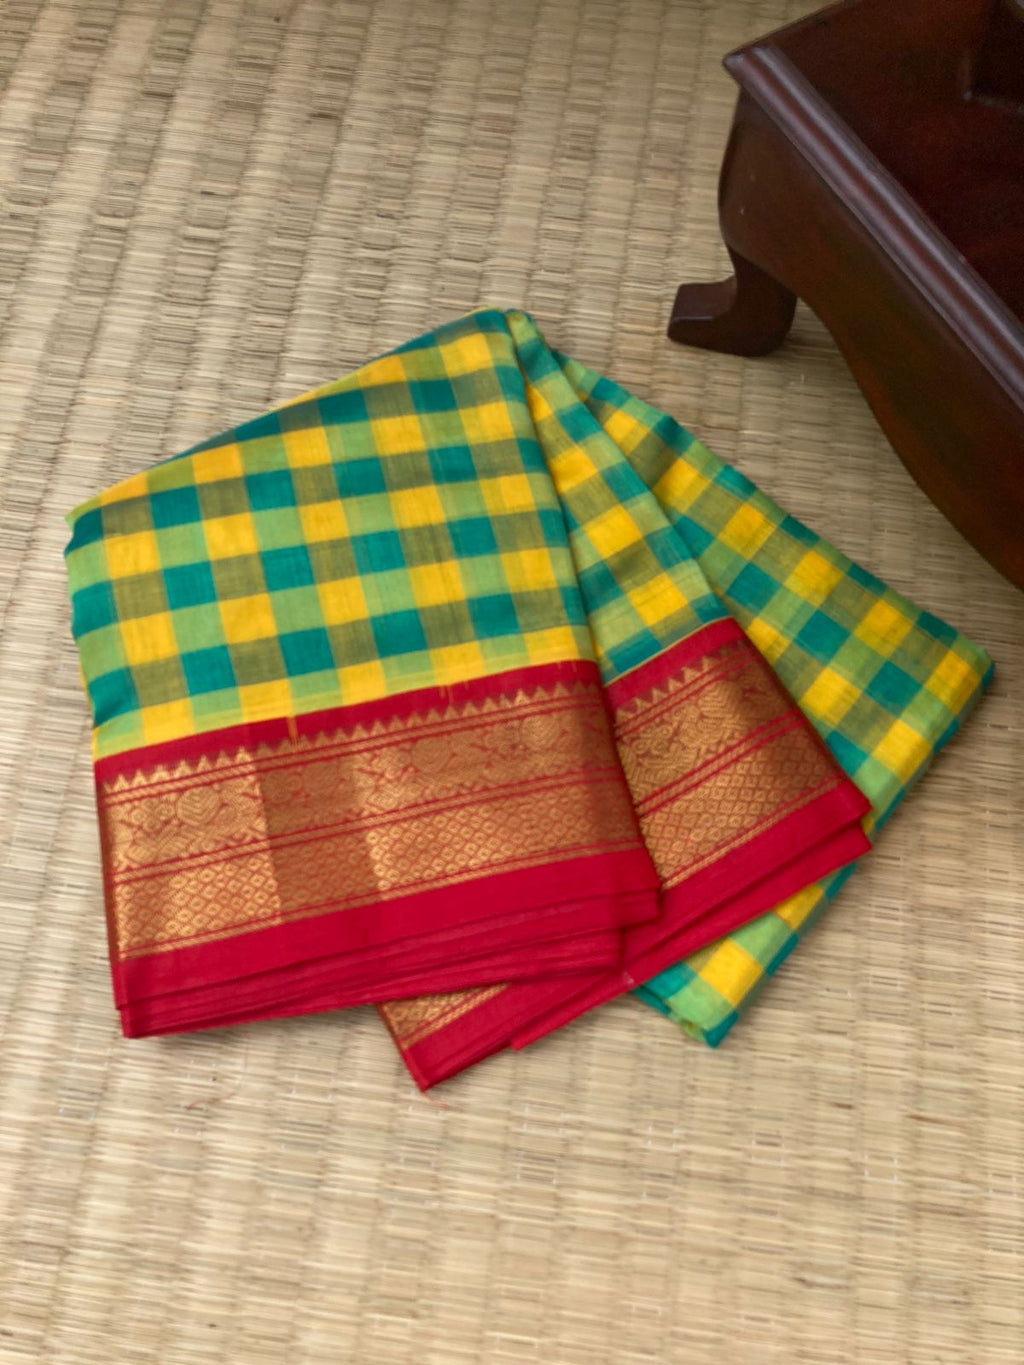 Paalum Palamum Kattams Korvai Silk Cottons - yellow and green chex body with red borders